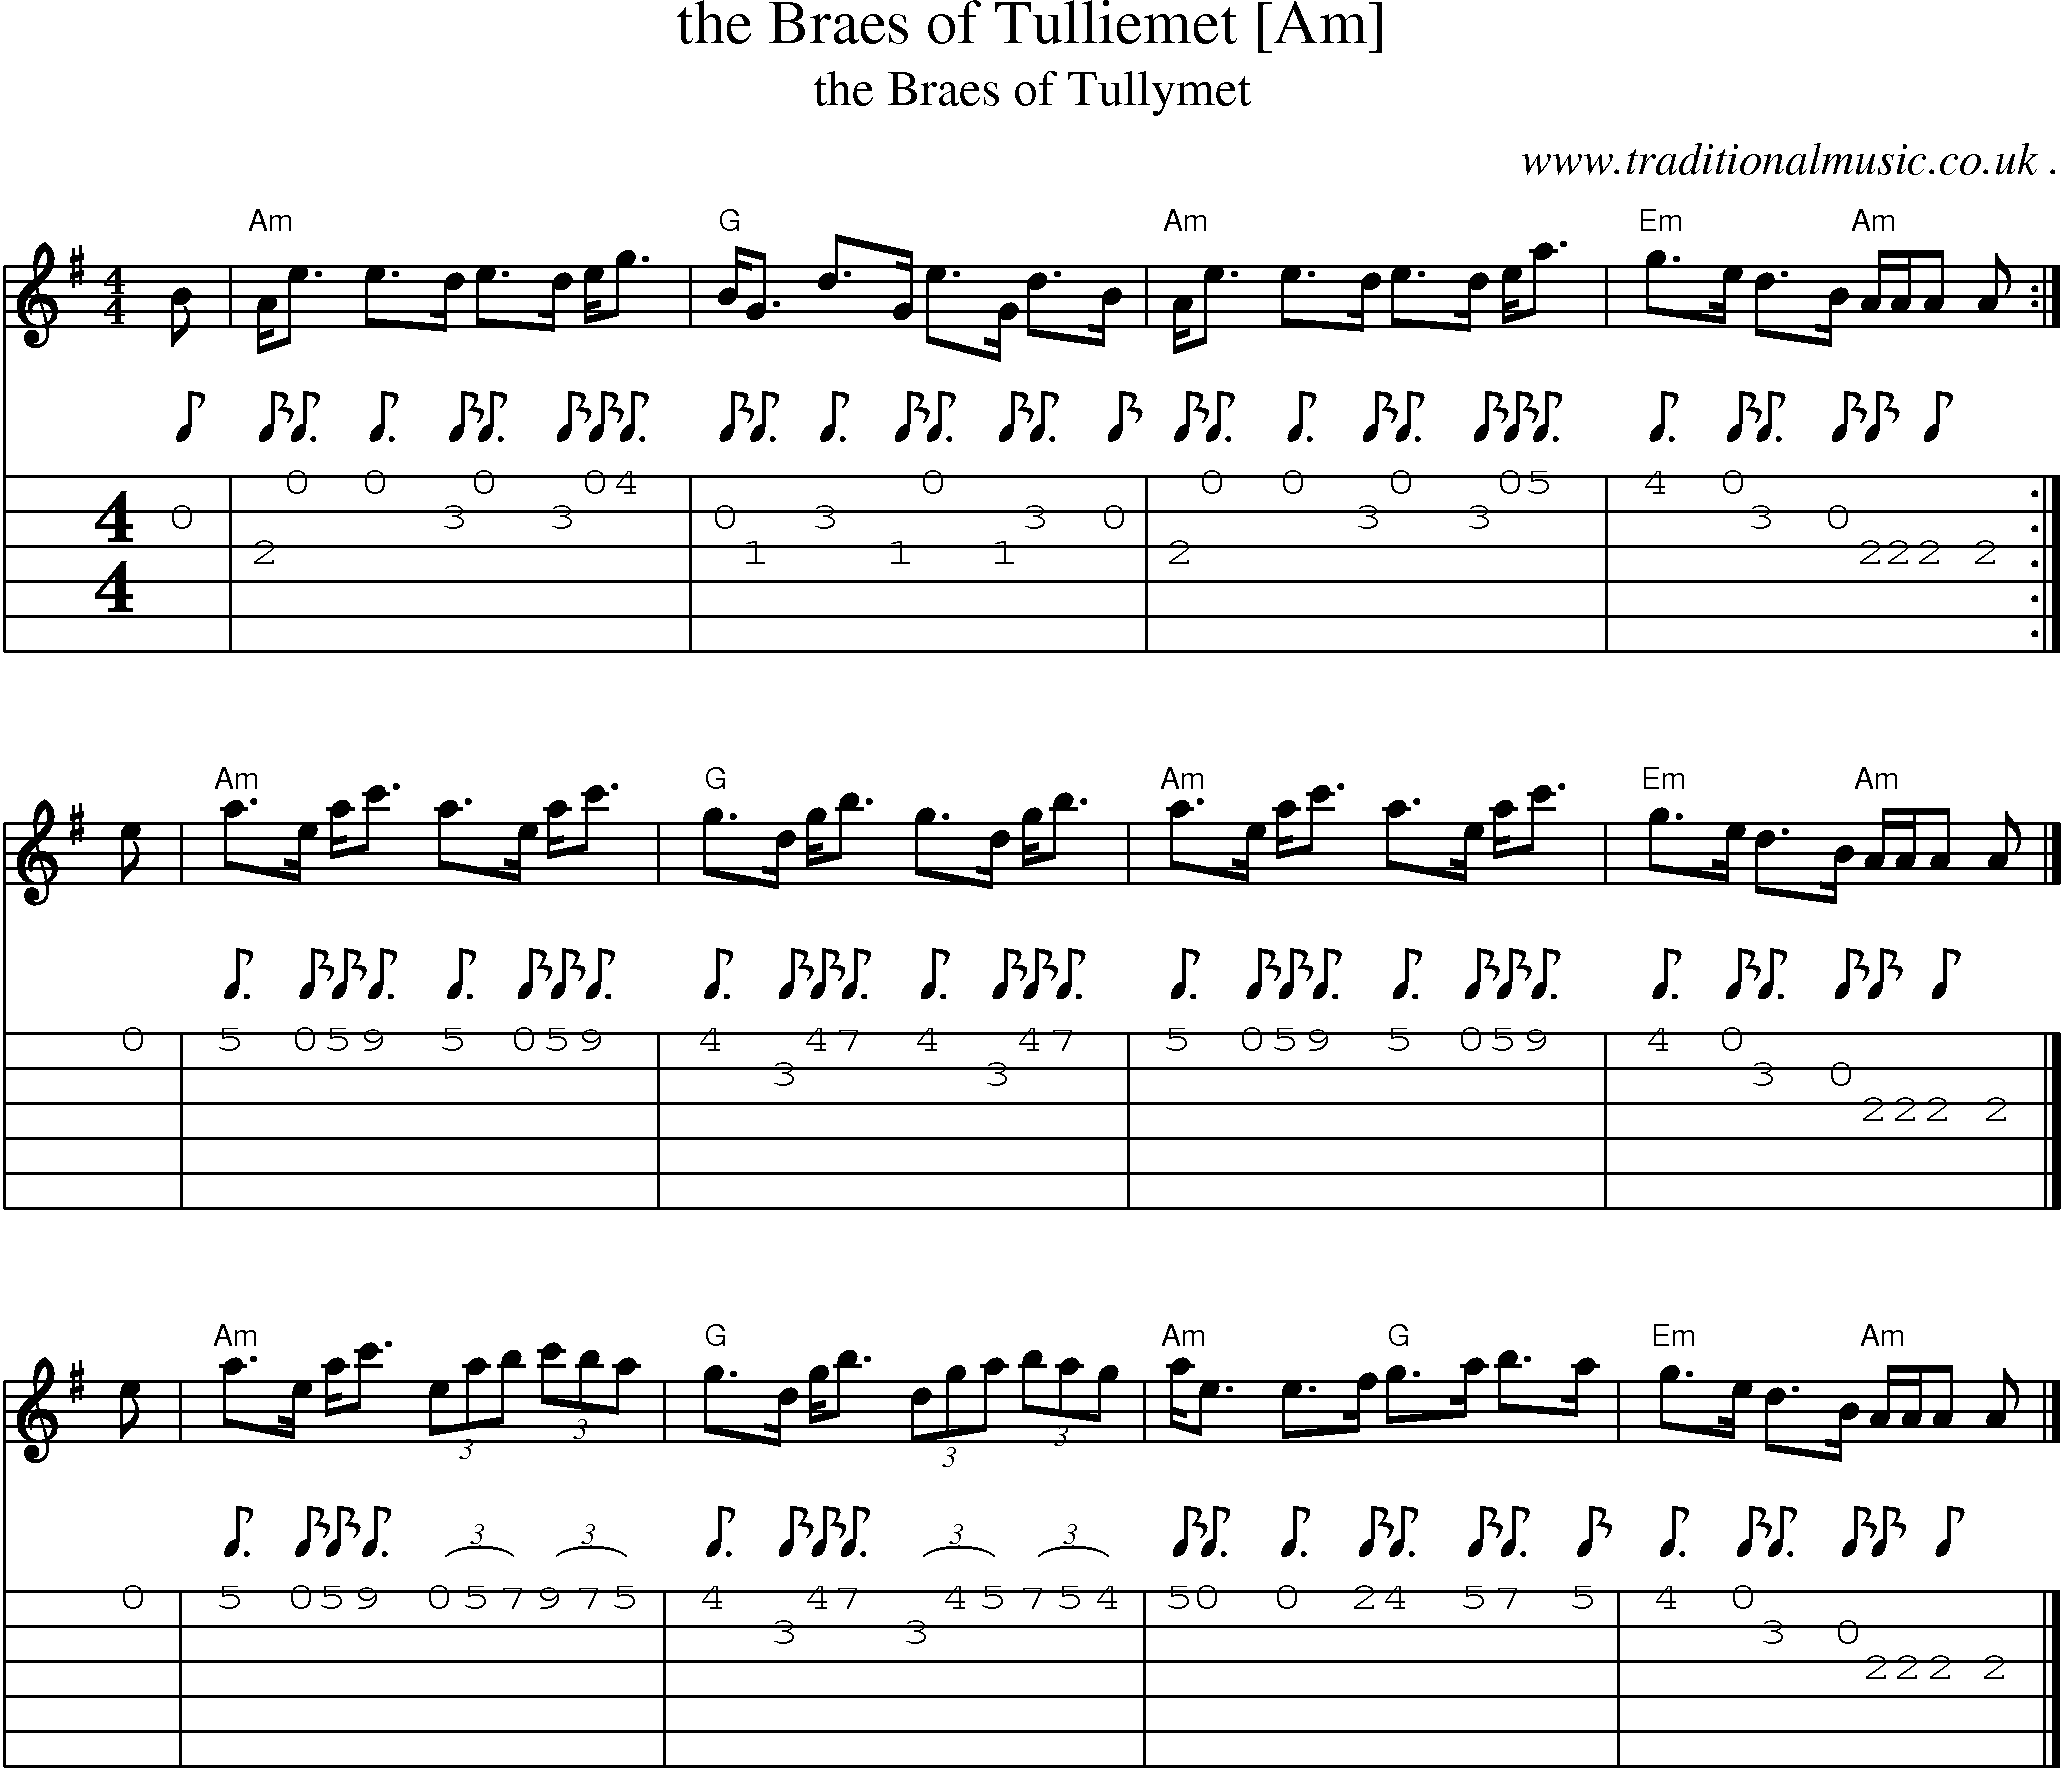 Sheet-music  score, Chords and Guitar Tabs for The Braes Of Tulliemet [am]